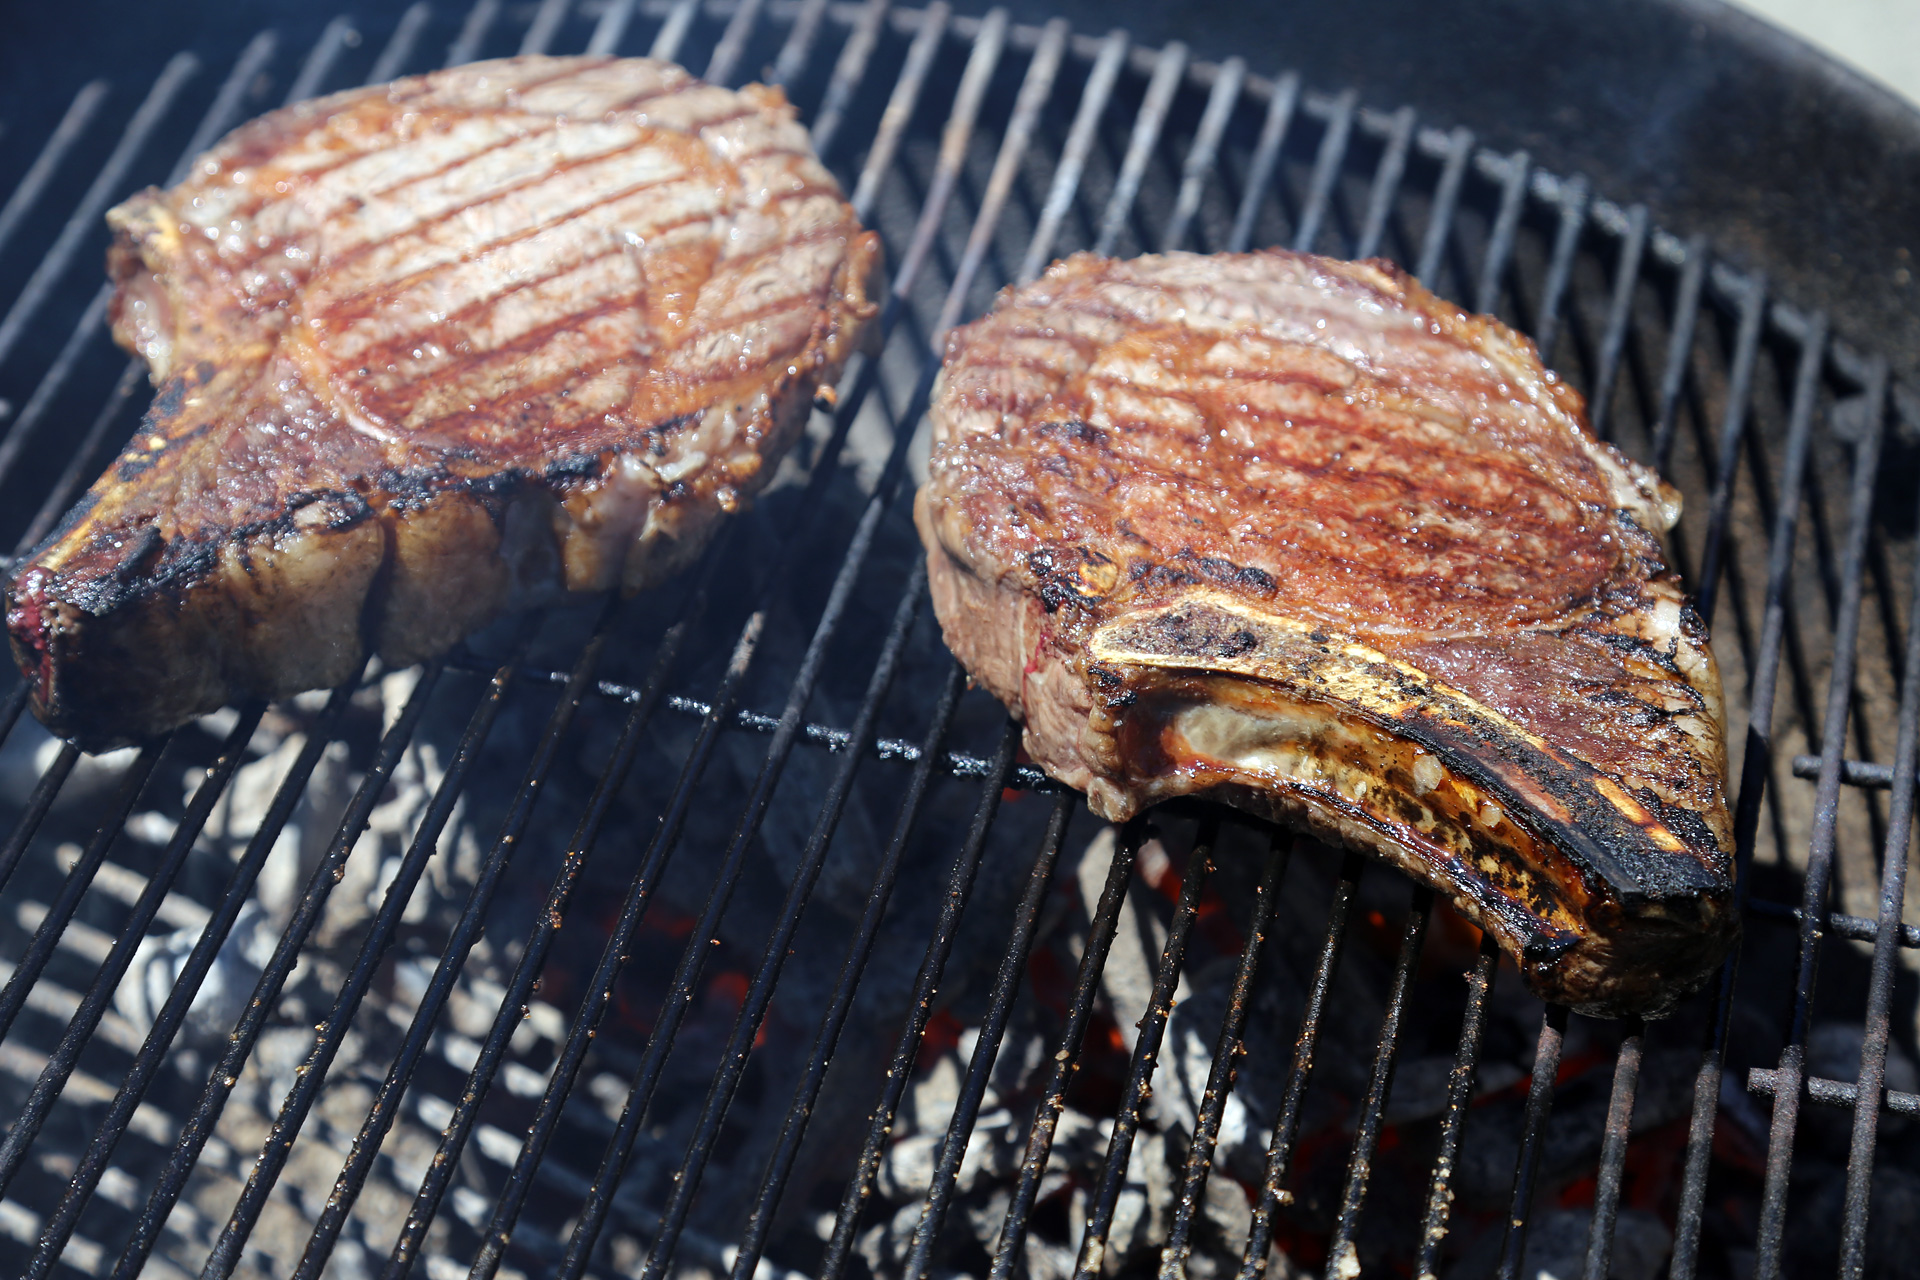 Sear the steak over the hot fire until a nice char forms on the exterior, turning occasionally.